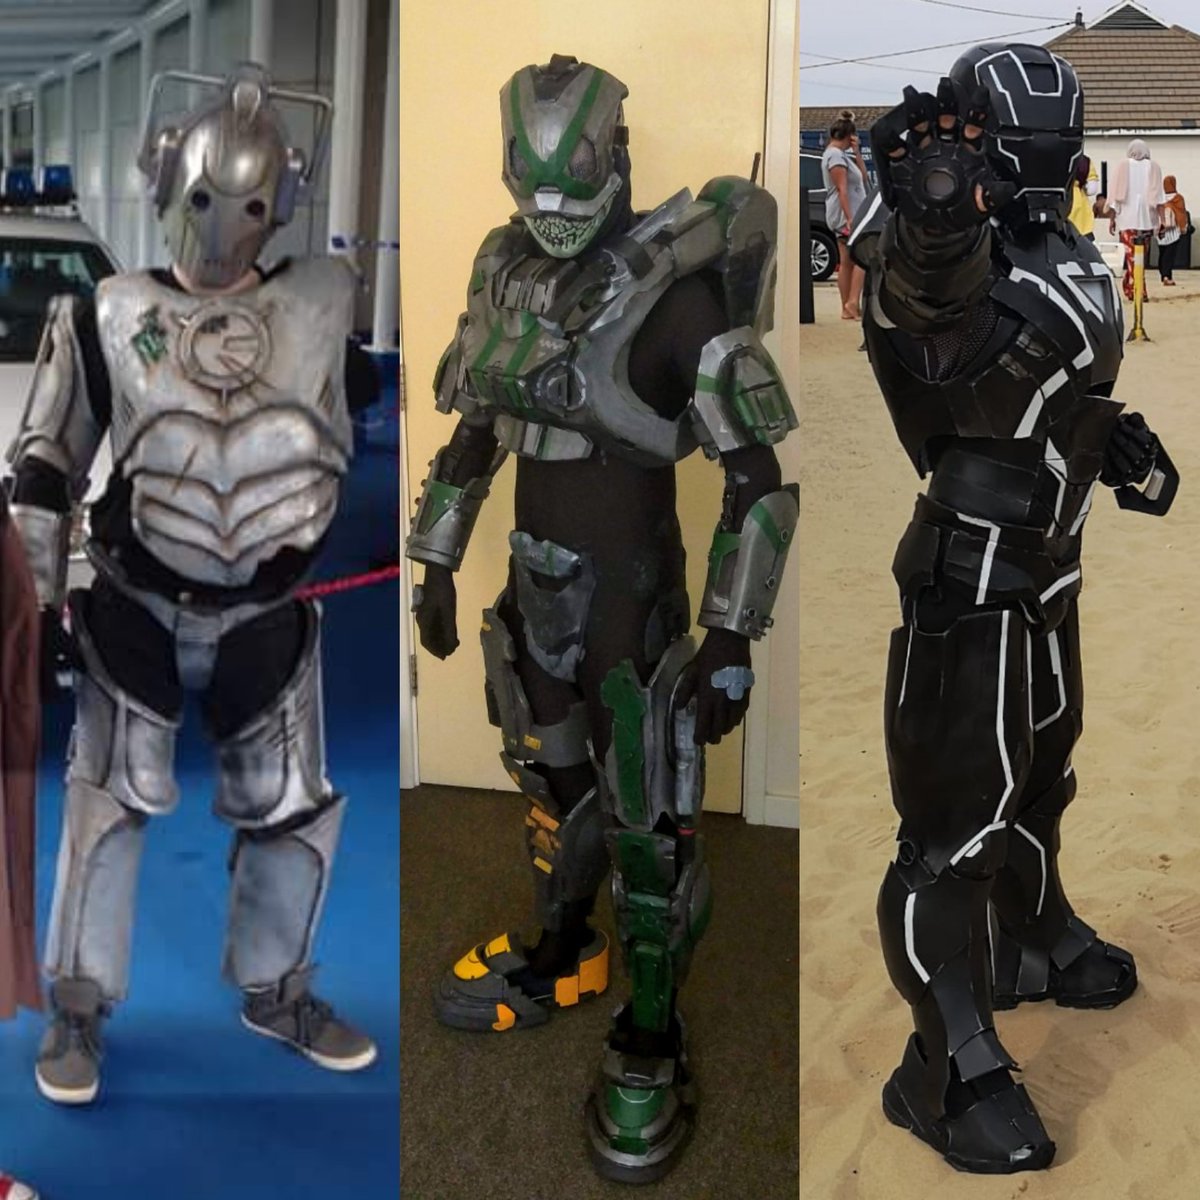 Foamsmith Joe On Twitter Suit Evolution And My Obsession With Eva Foam From 2016 To 2019 Here S To More Projects In The Future Cyberman Ironman Marvel Doctorwho Halo Redvsblue Halocosplay